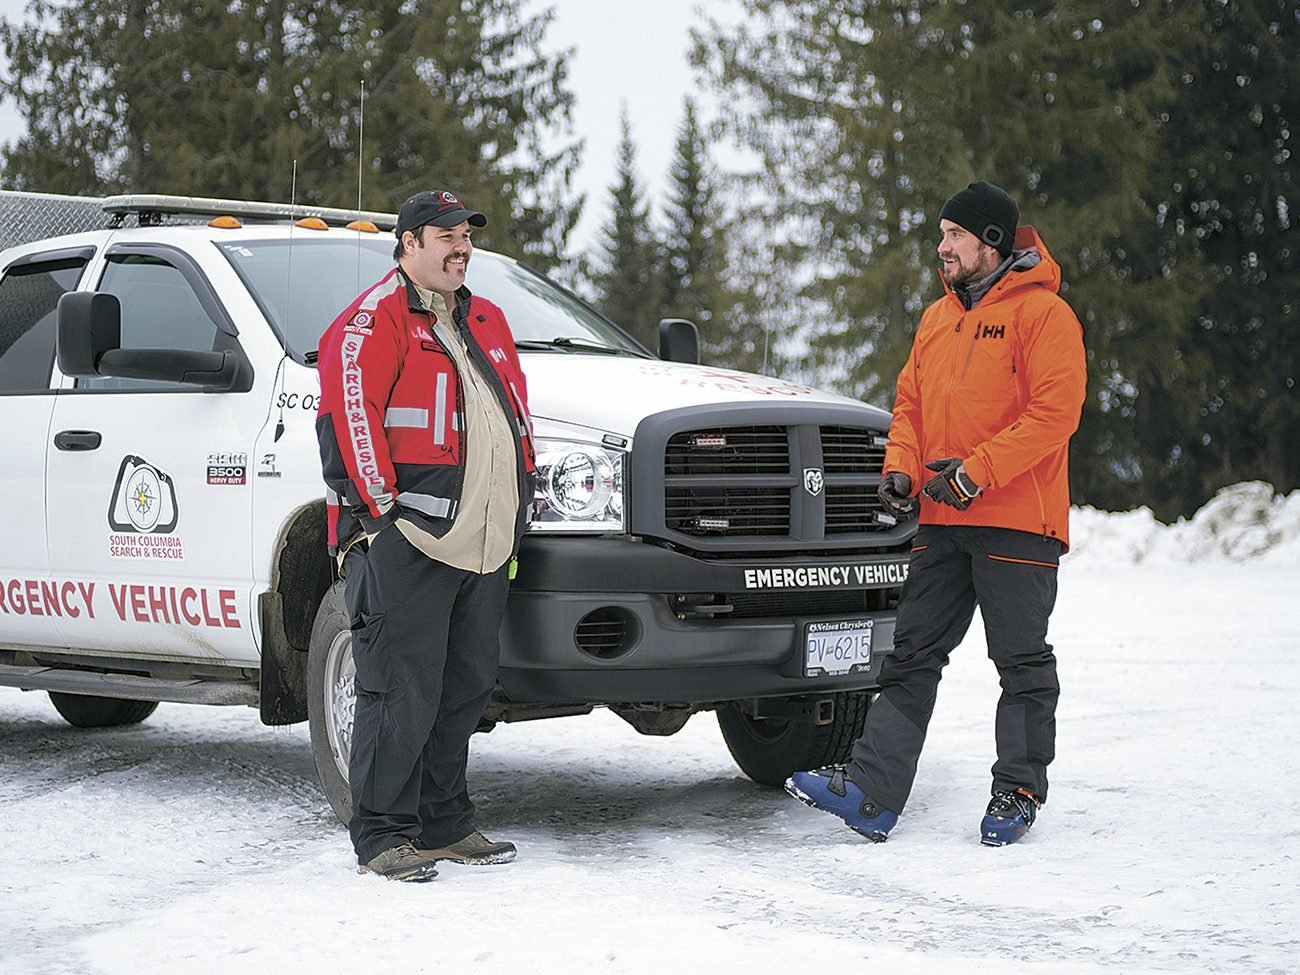 After his ordeal, Gayowski began training to join a search-and-rescue team